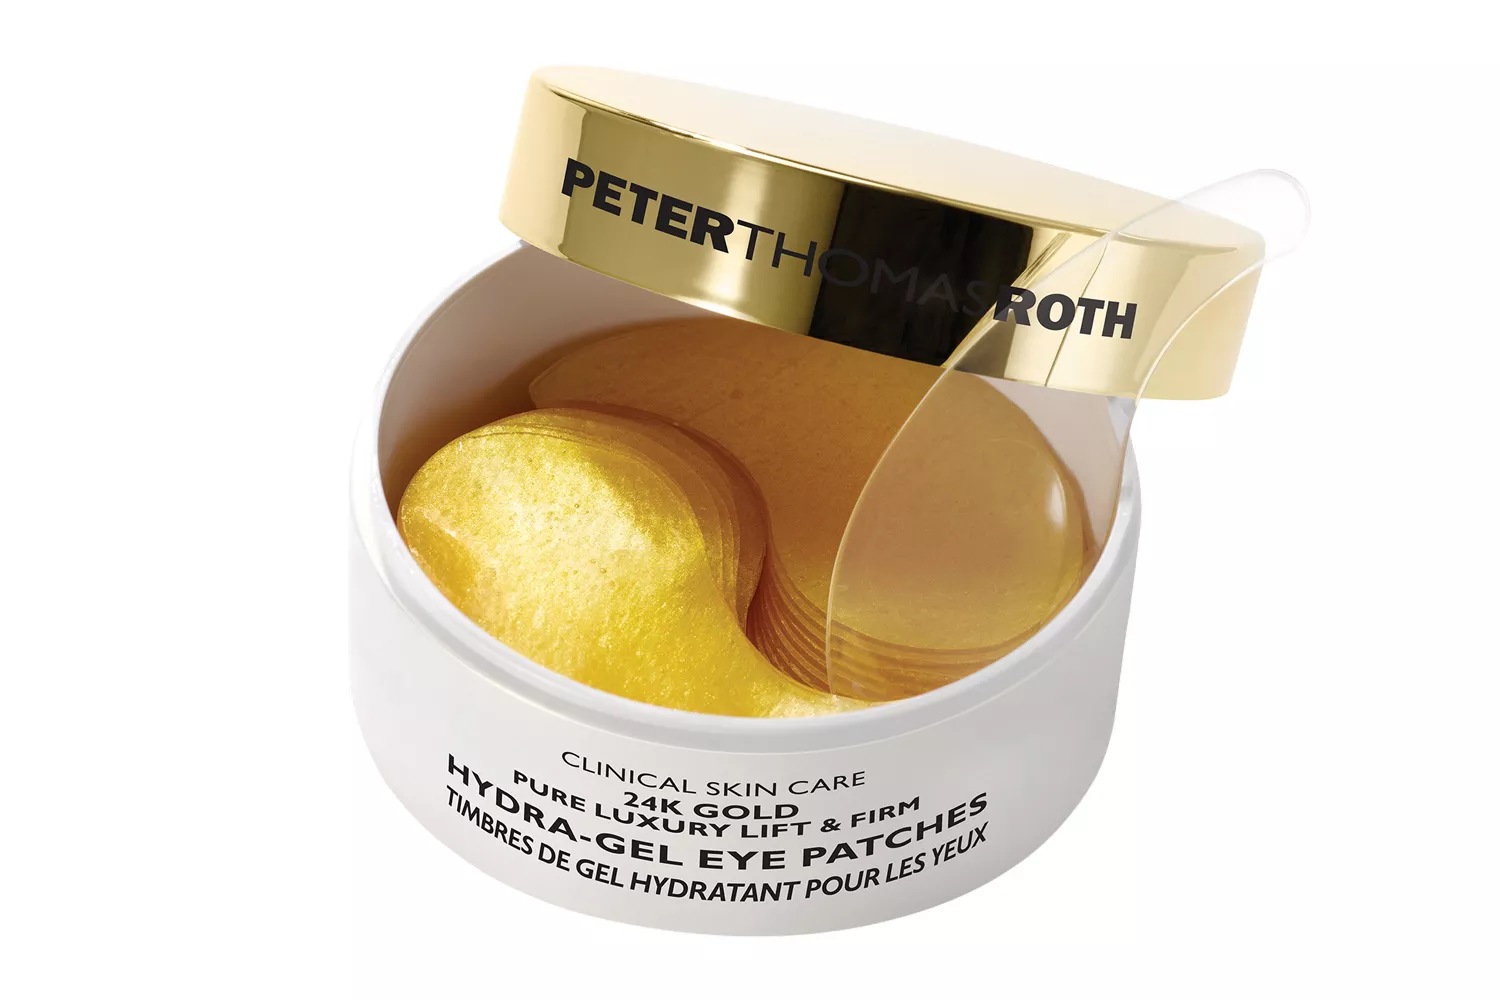 Peter Thomas Roth 24K Gold Pure Luxury Lift &amp; Firm Hydra-Gel Eye Patches